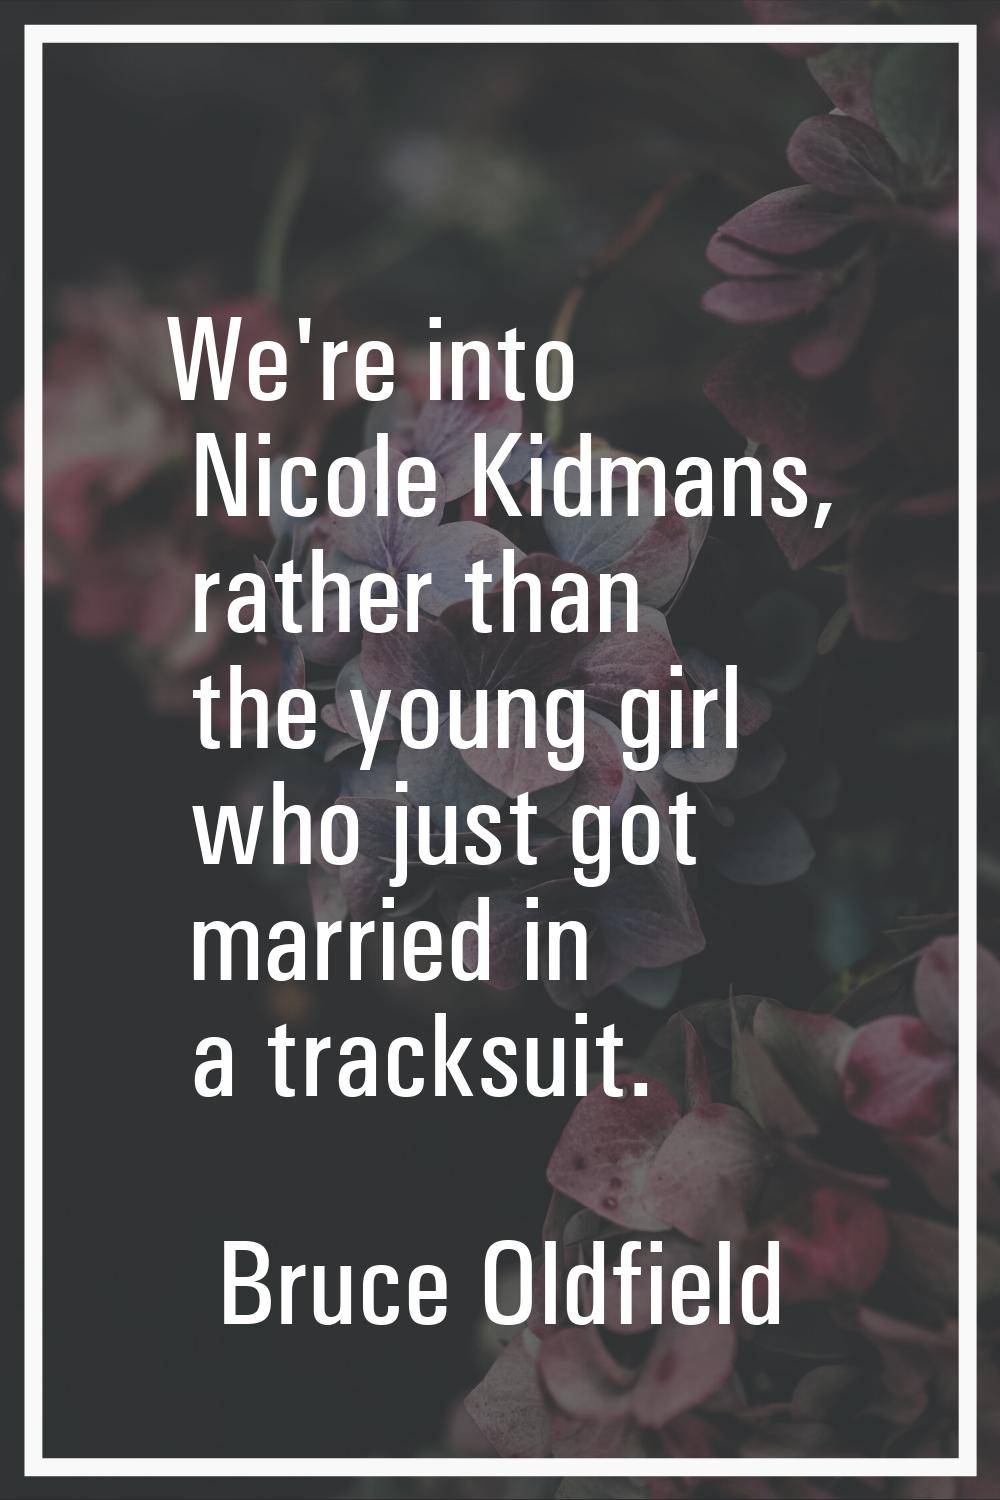 We're into Nicole Kidmans, rather than the young girl who just got married in a tracksuit.